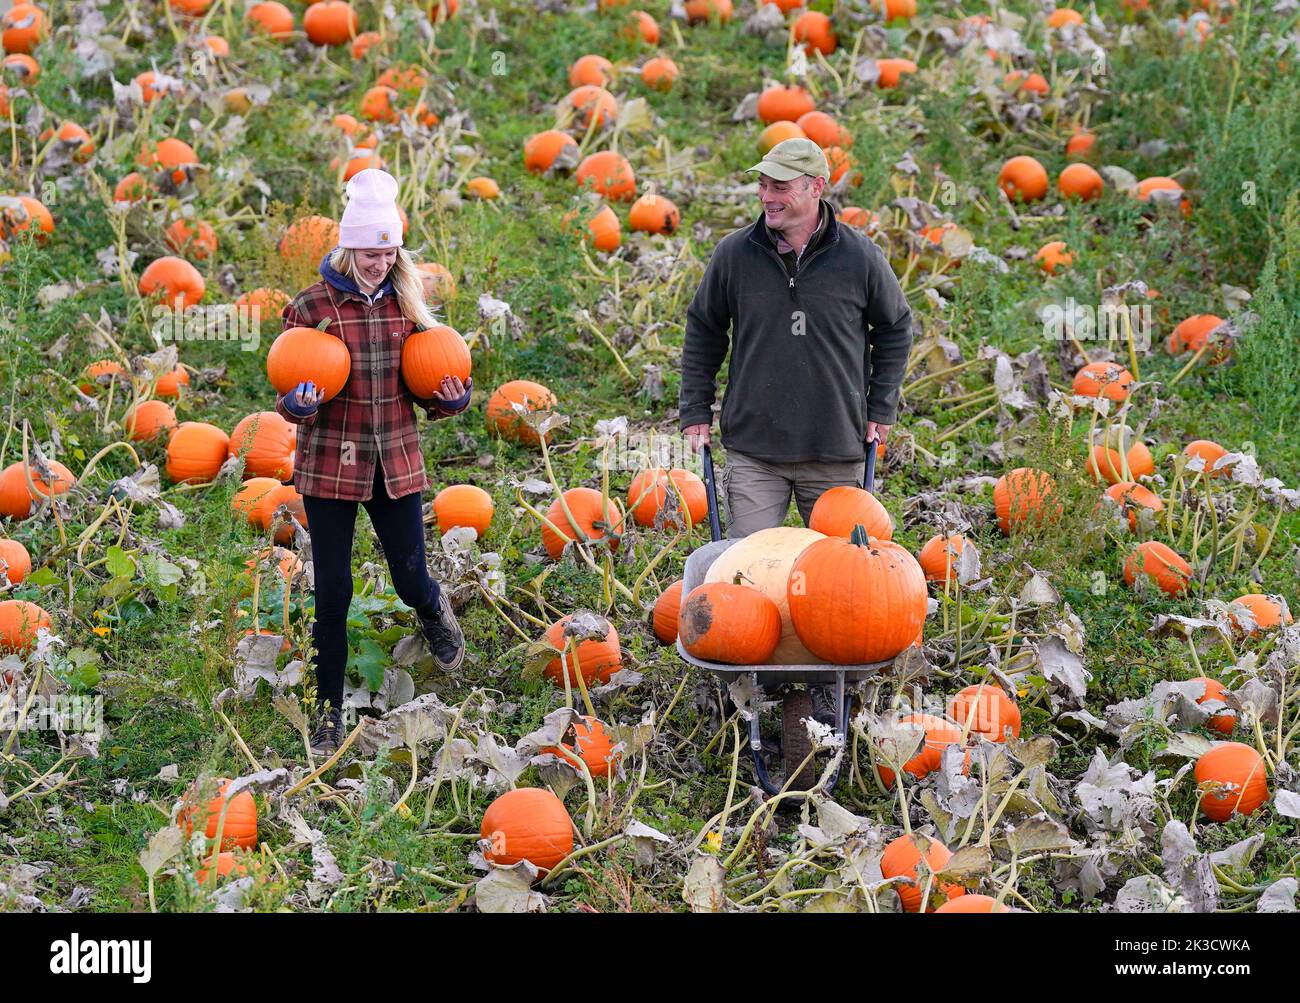 Farmer Tom Spilman (right) and Sandra Mlynarova (left) harvest some of the 100,000 pumkins that have been grown ahead of the Spilmans Pumpkin Festival, that opens this Saturday at Tom Spilmans' Pumpkin Farm in Thirsk. Picture date: Monday September 26, 2022. Planted in May, the farm has grown 20 varieties of pumpkins over 25 acres of land, for the pumpkin picking season ahead of Halloween. Stock Photo